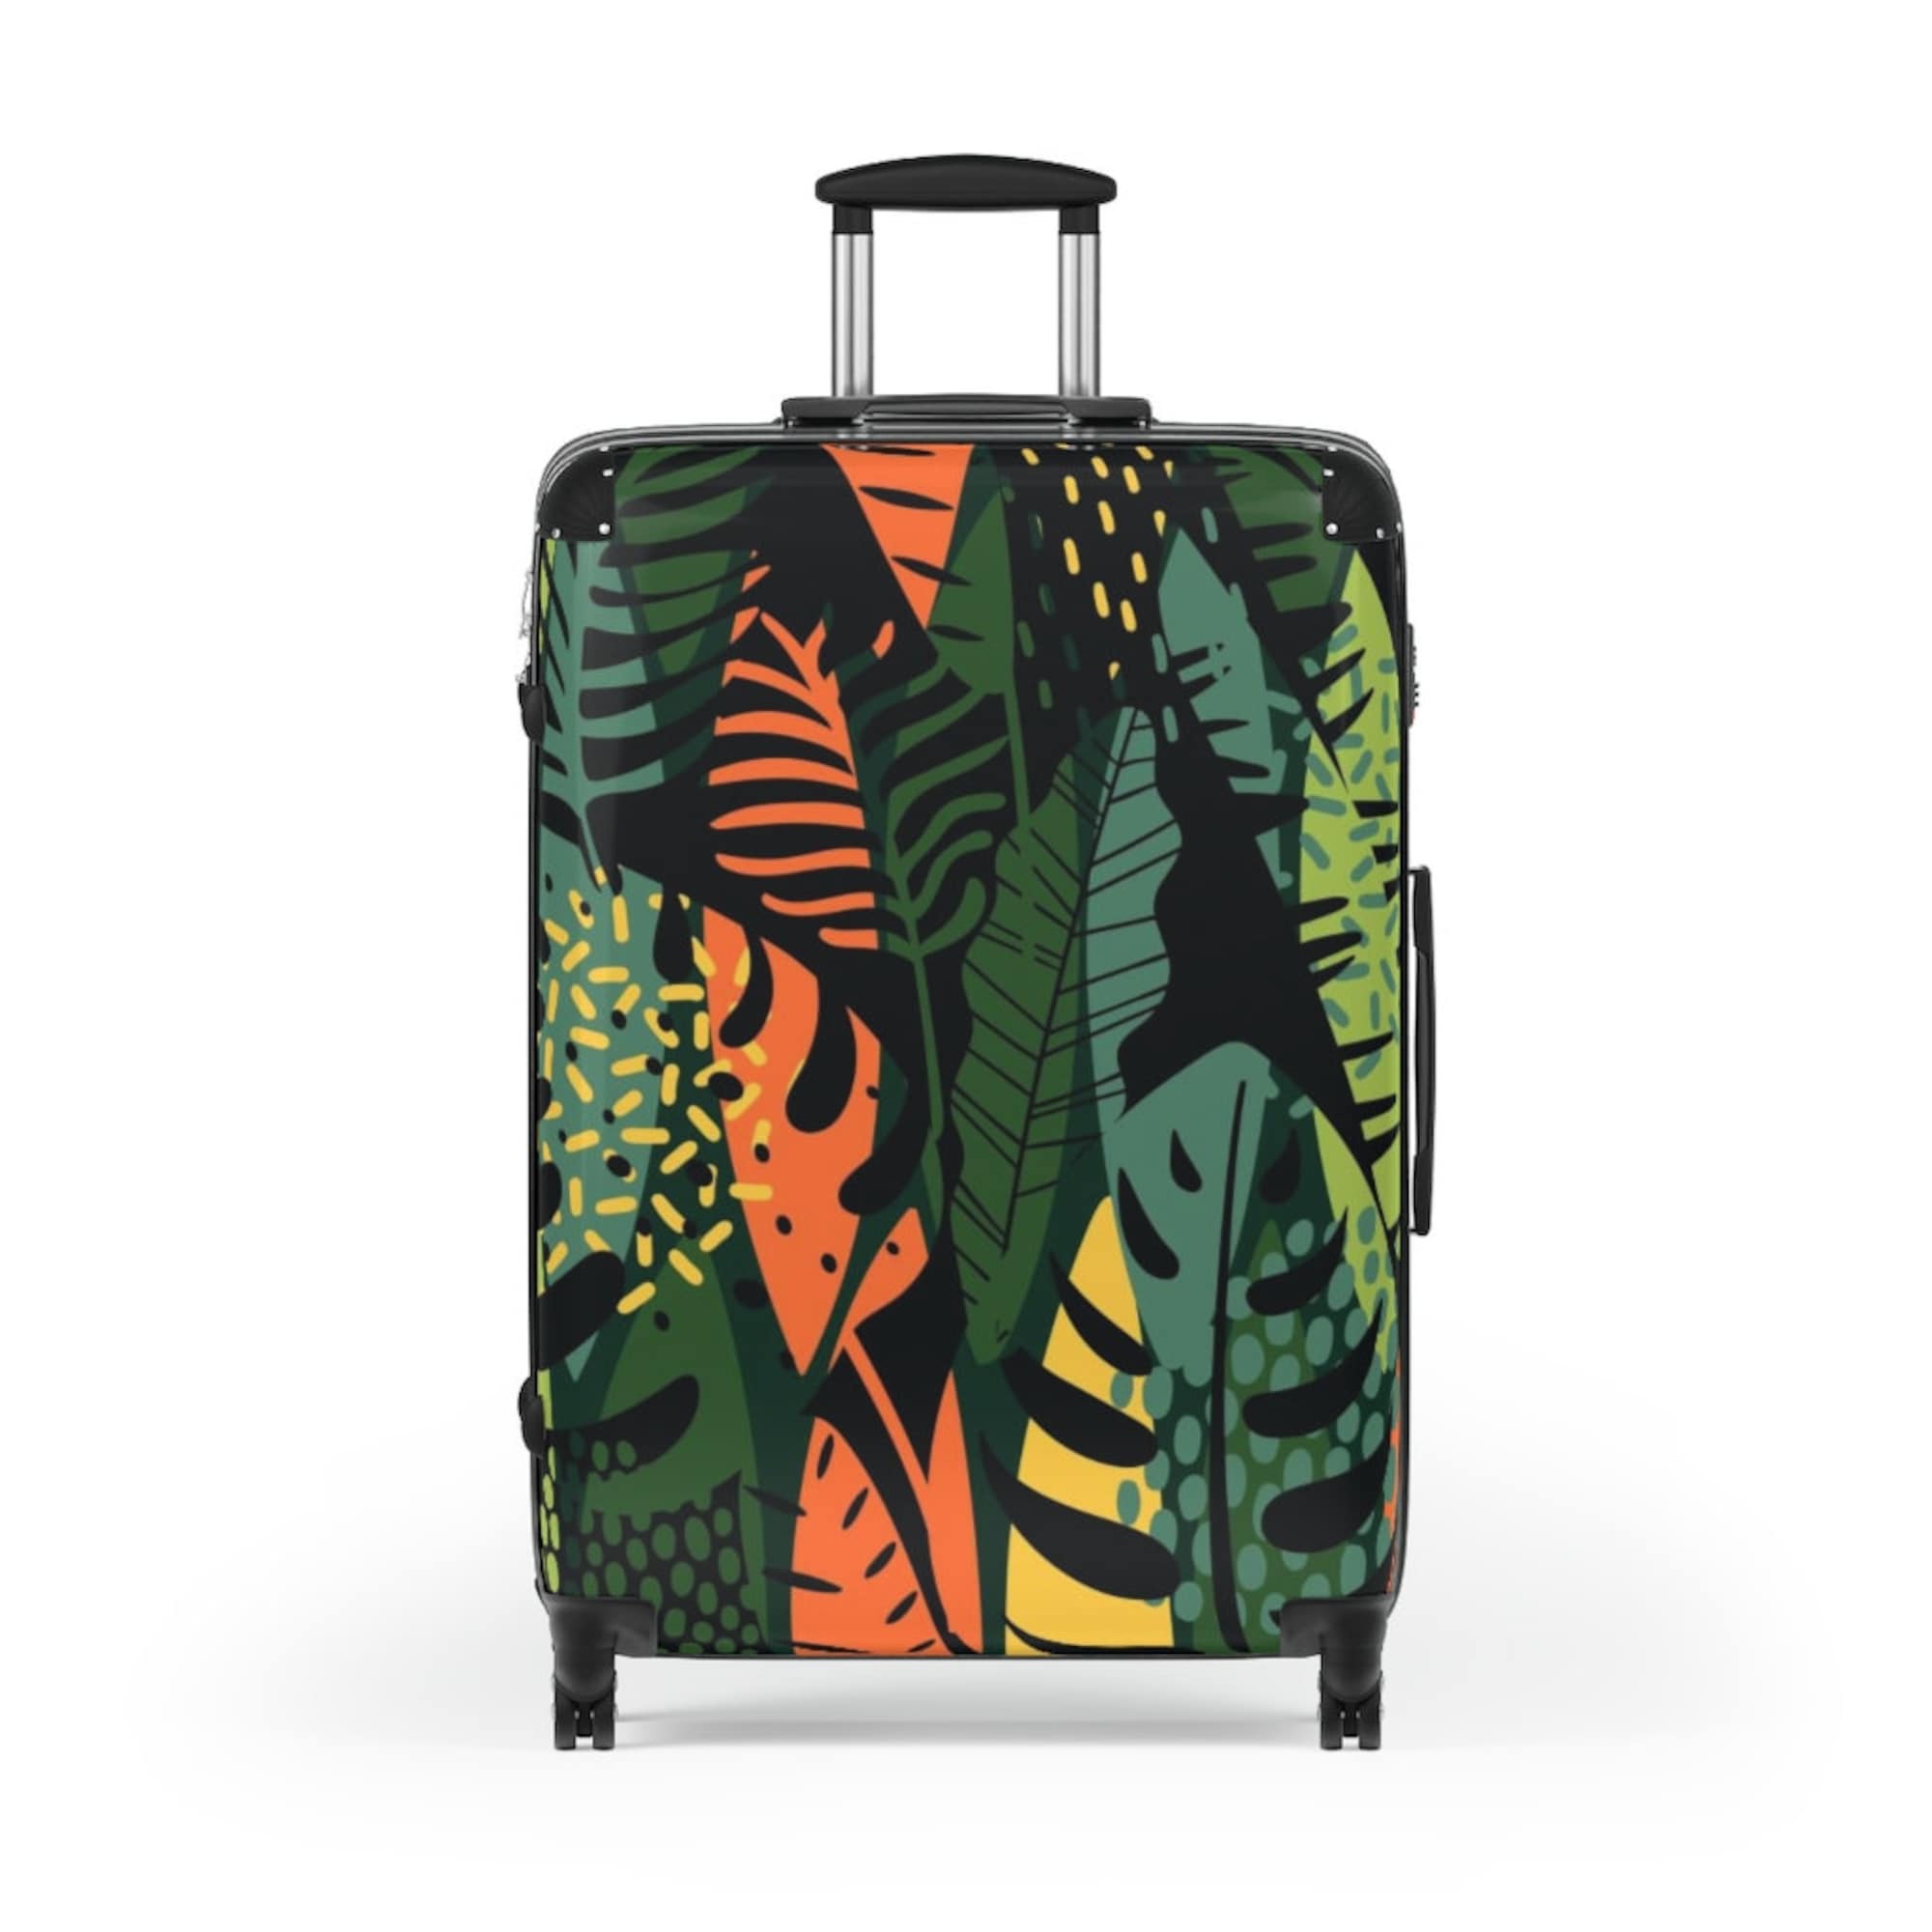 Discover The Forest In Color Suitcase